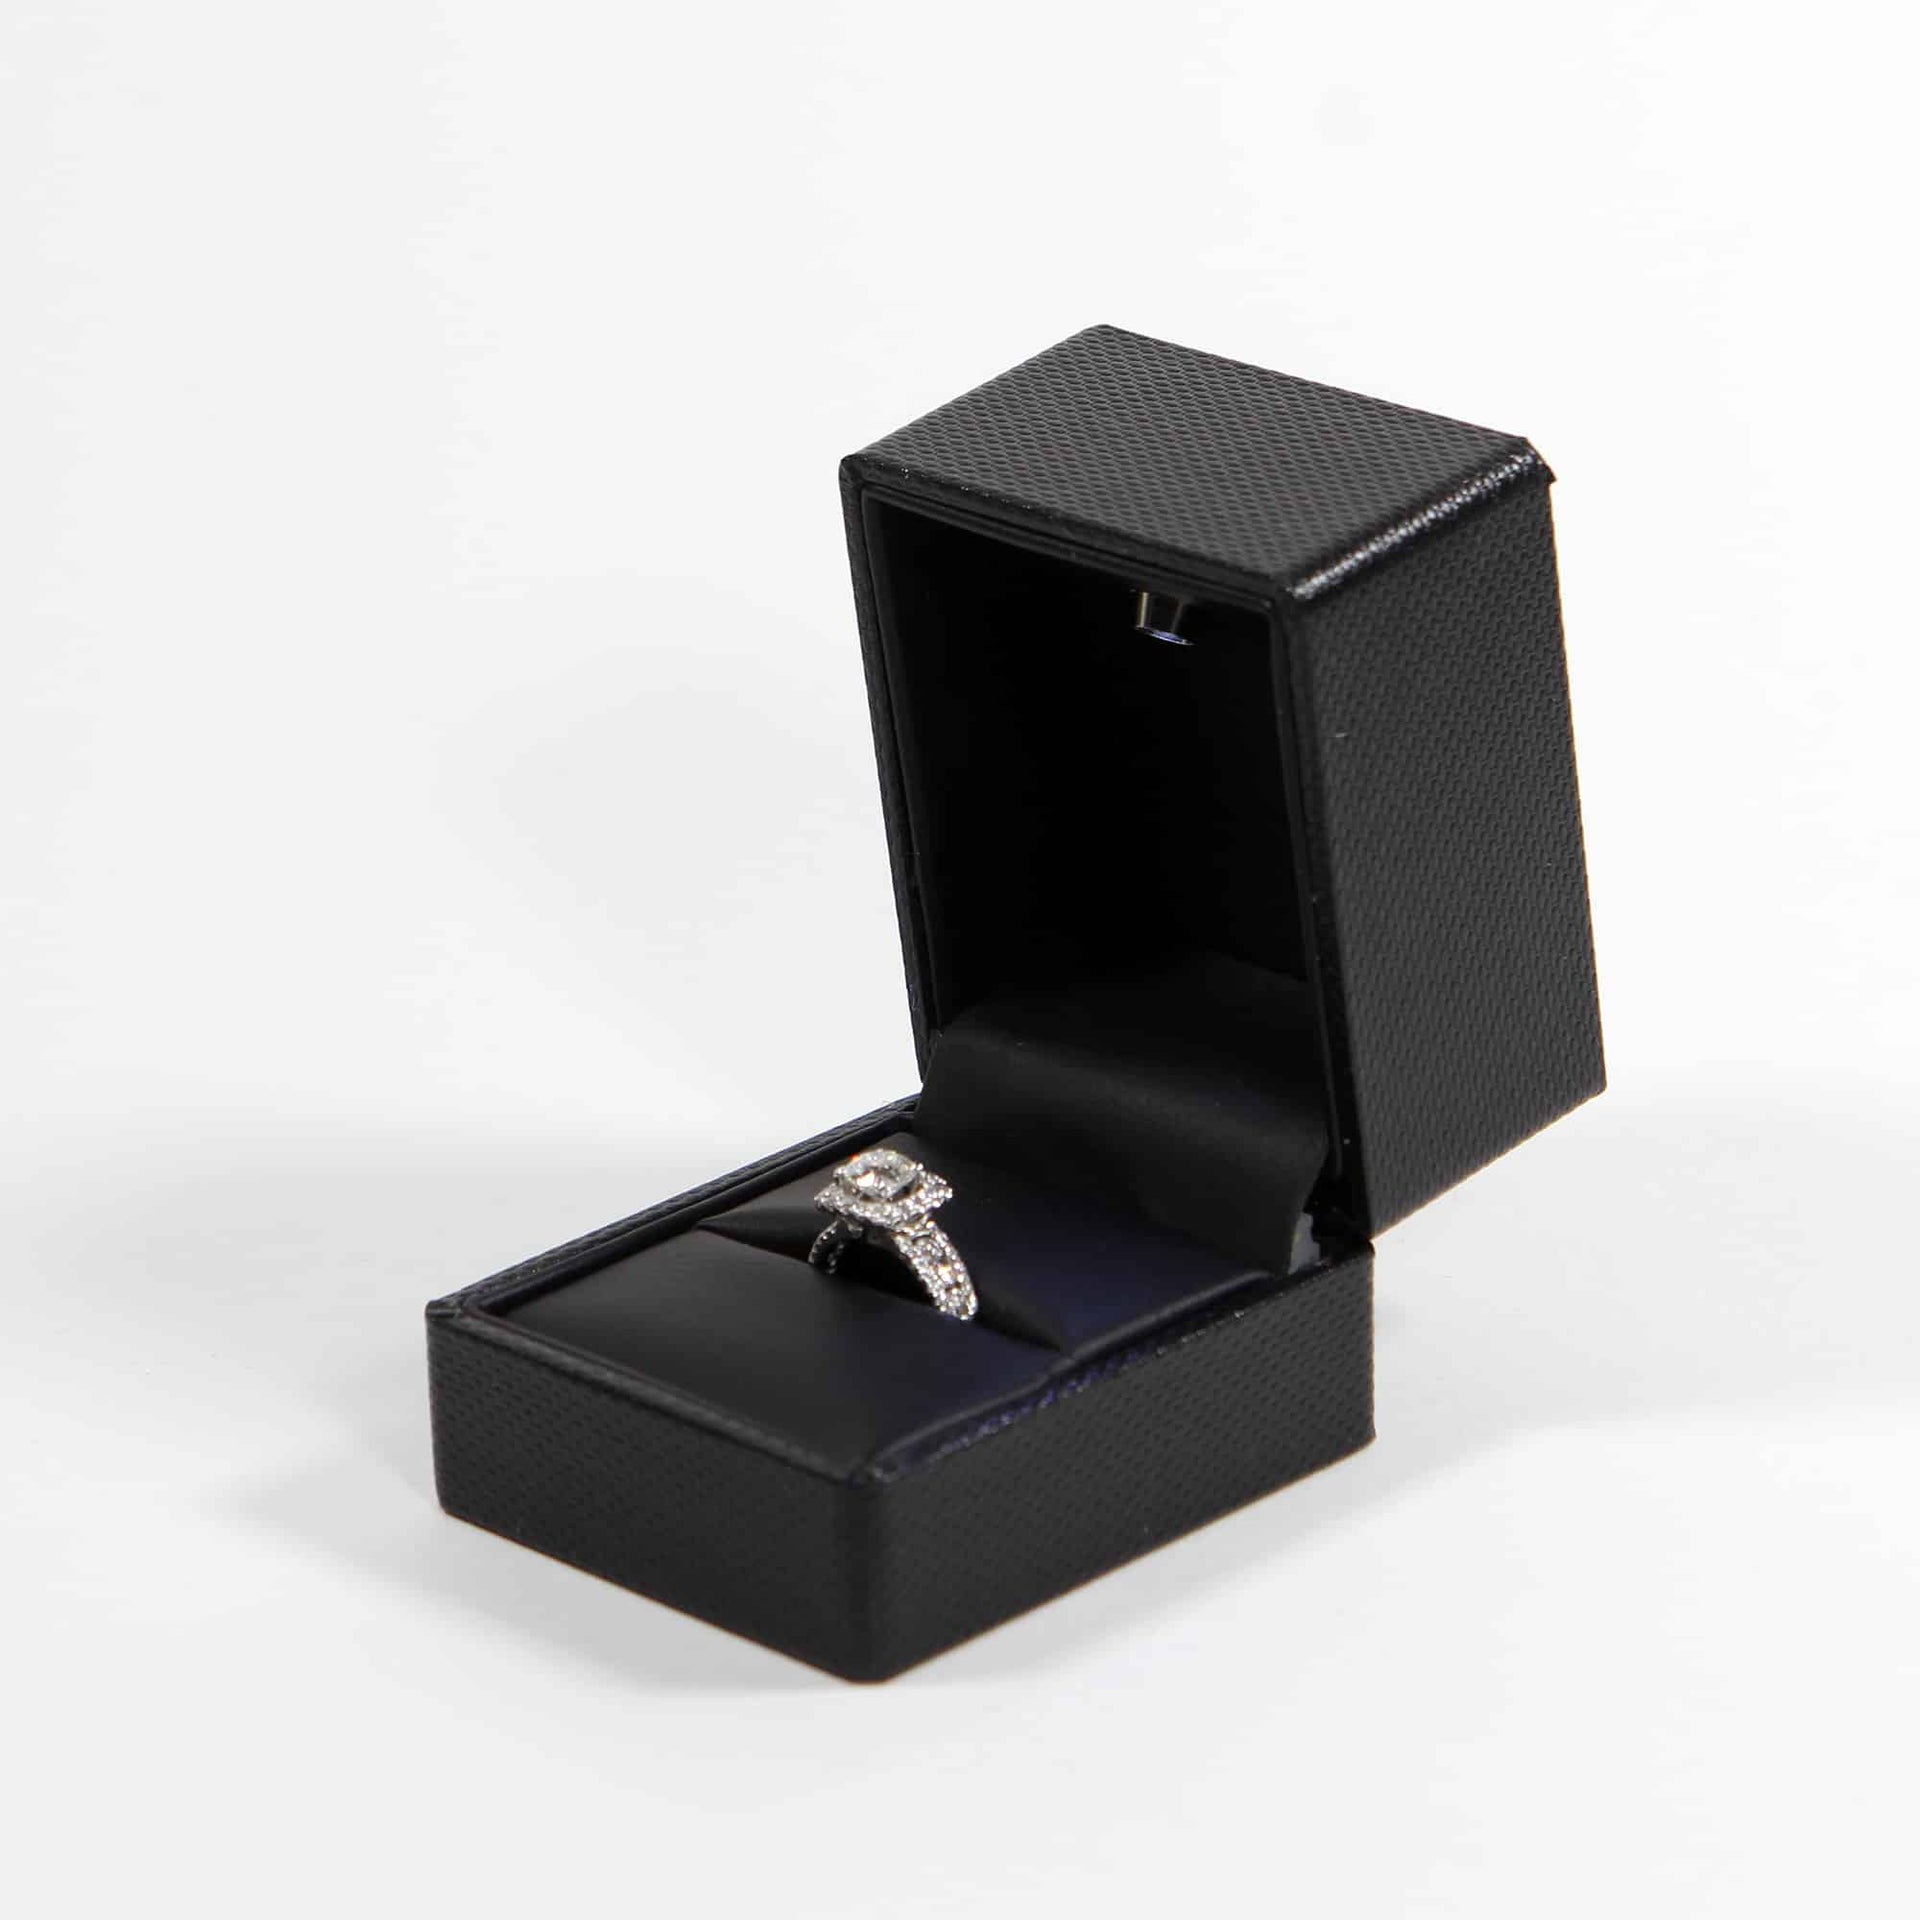 This is a modern black ring box that has a built in led light pointed down at the ring. Great for weddings, proposals, ,engagements or just to show off your gems! Comes gift ready with a gift box.. .